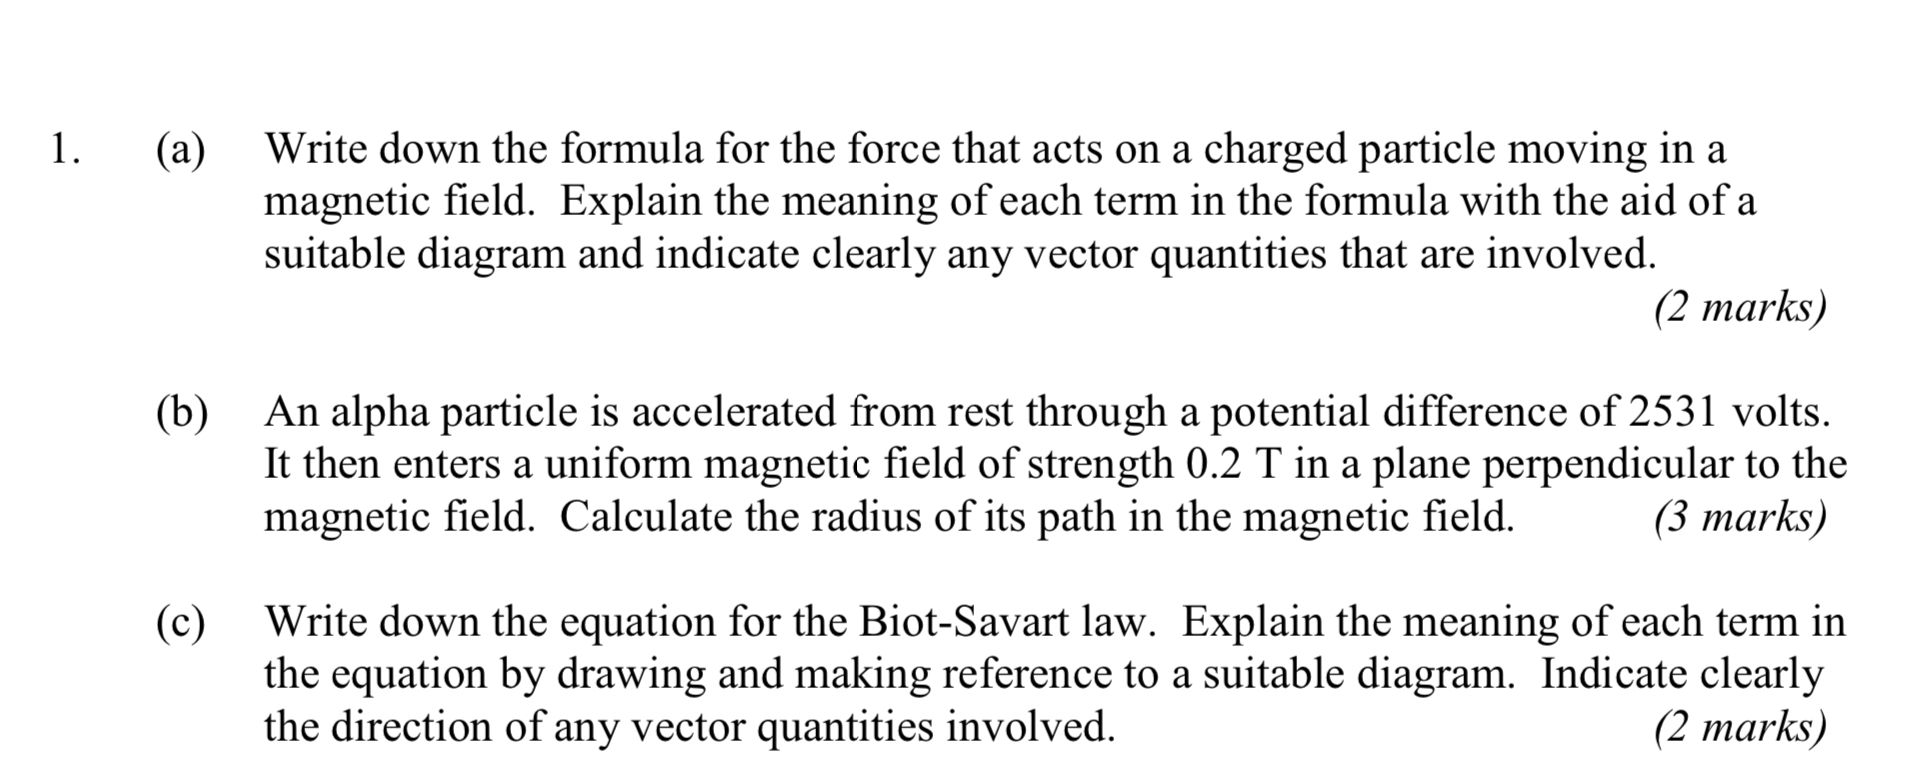 1. Write down the formula for the force that acts on a charged particle moving in a magnetic field. Explain